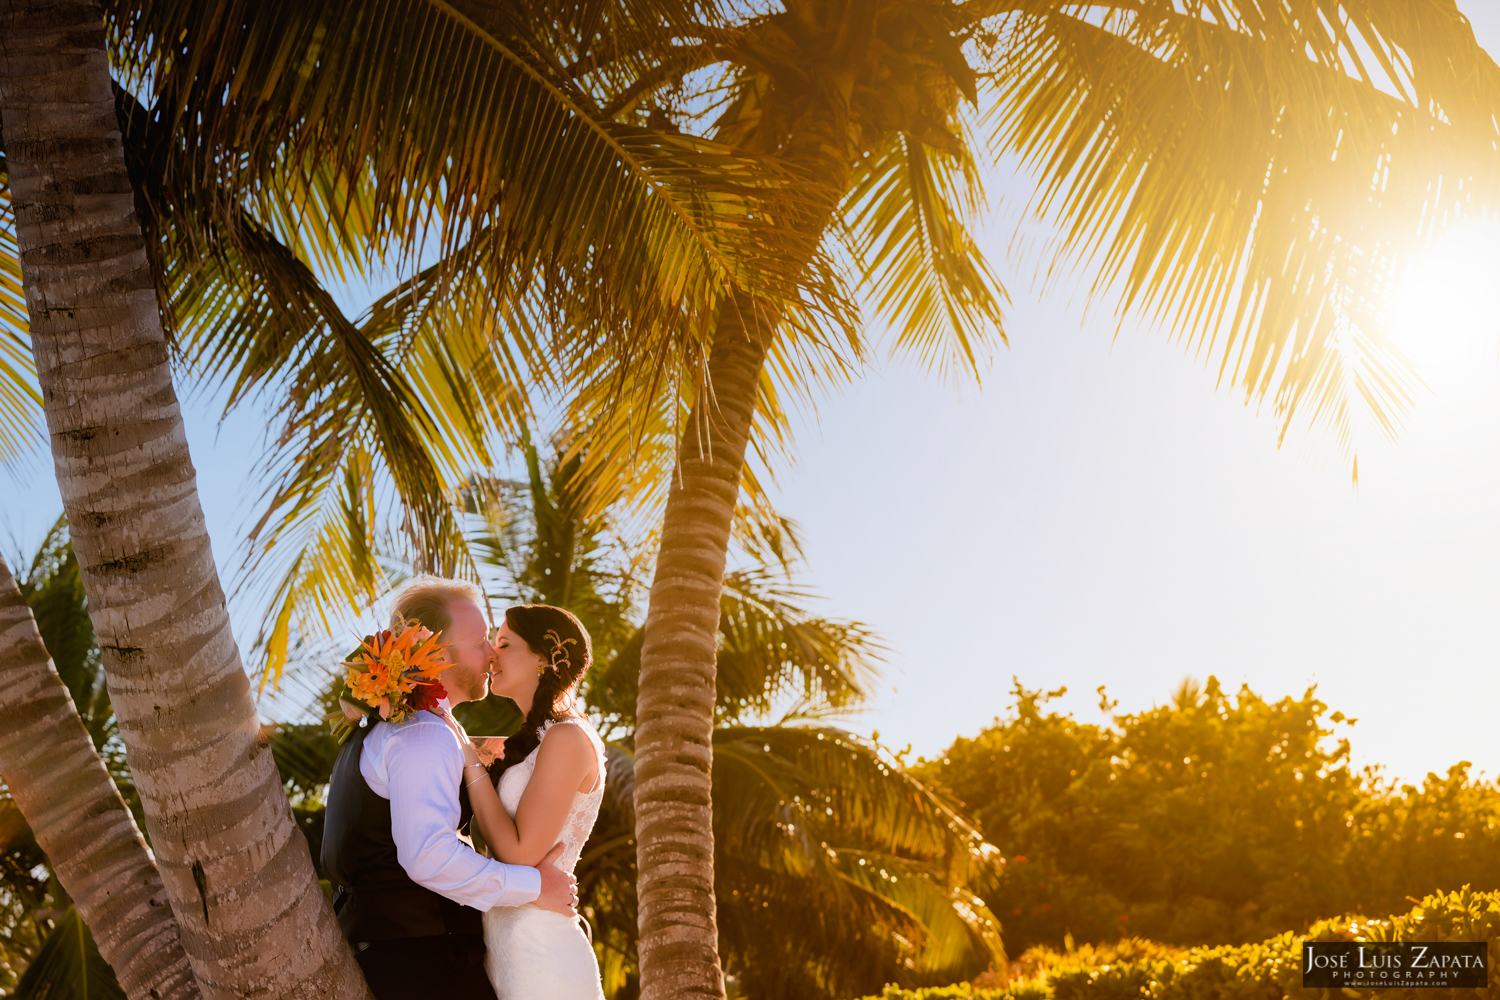 Leap Year Wedding in Belize - Jose Luis Zapata Photography - Belize Photographer (4)